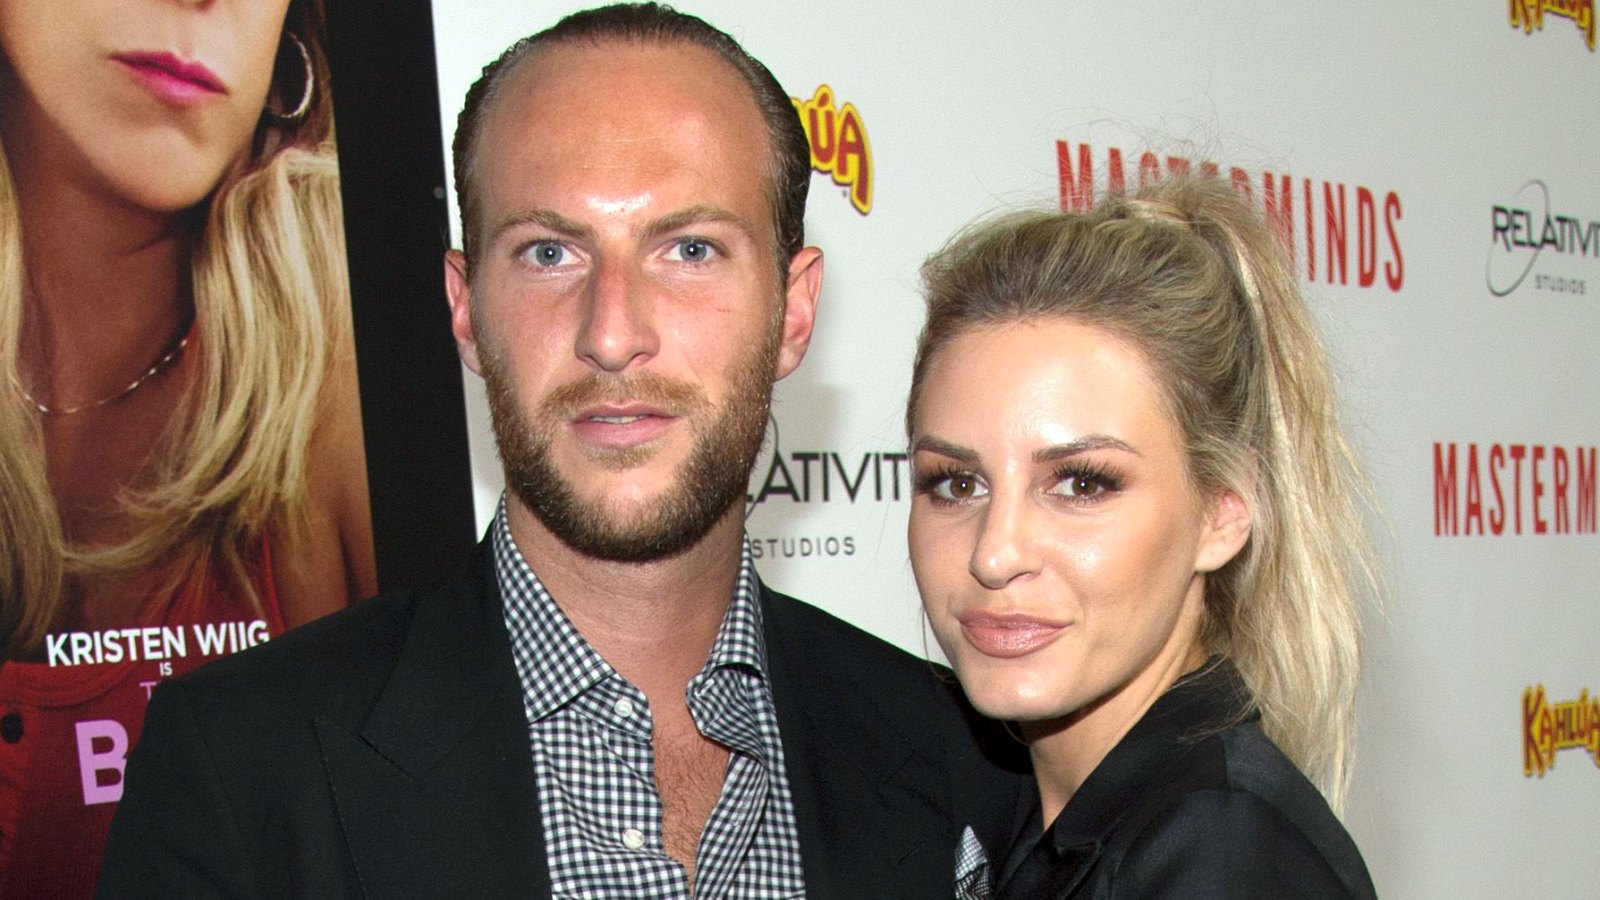 Morgan Stewart Files For Divorce From Brendan Fitzpatrick After 3 Years of Marriage